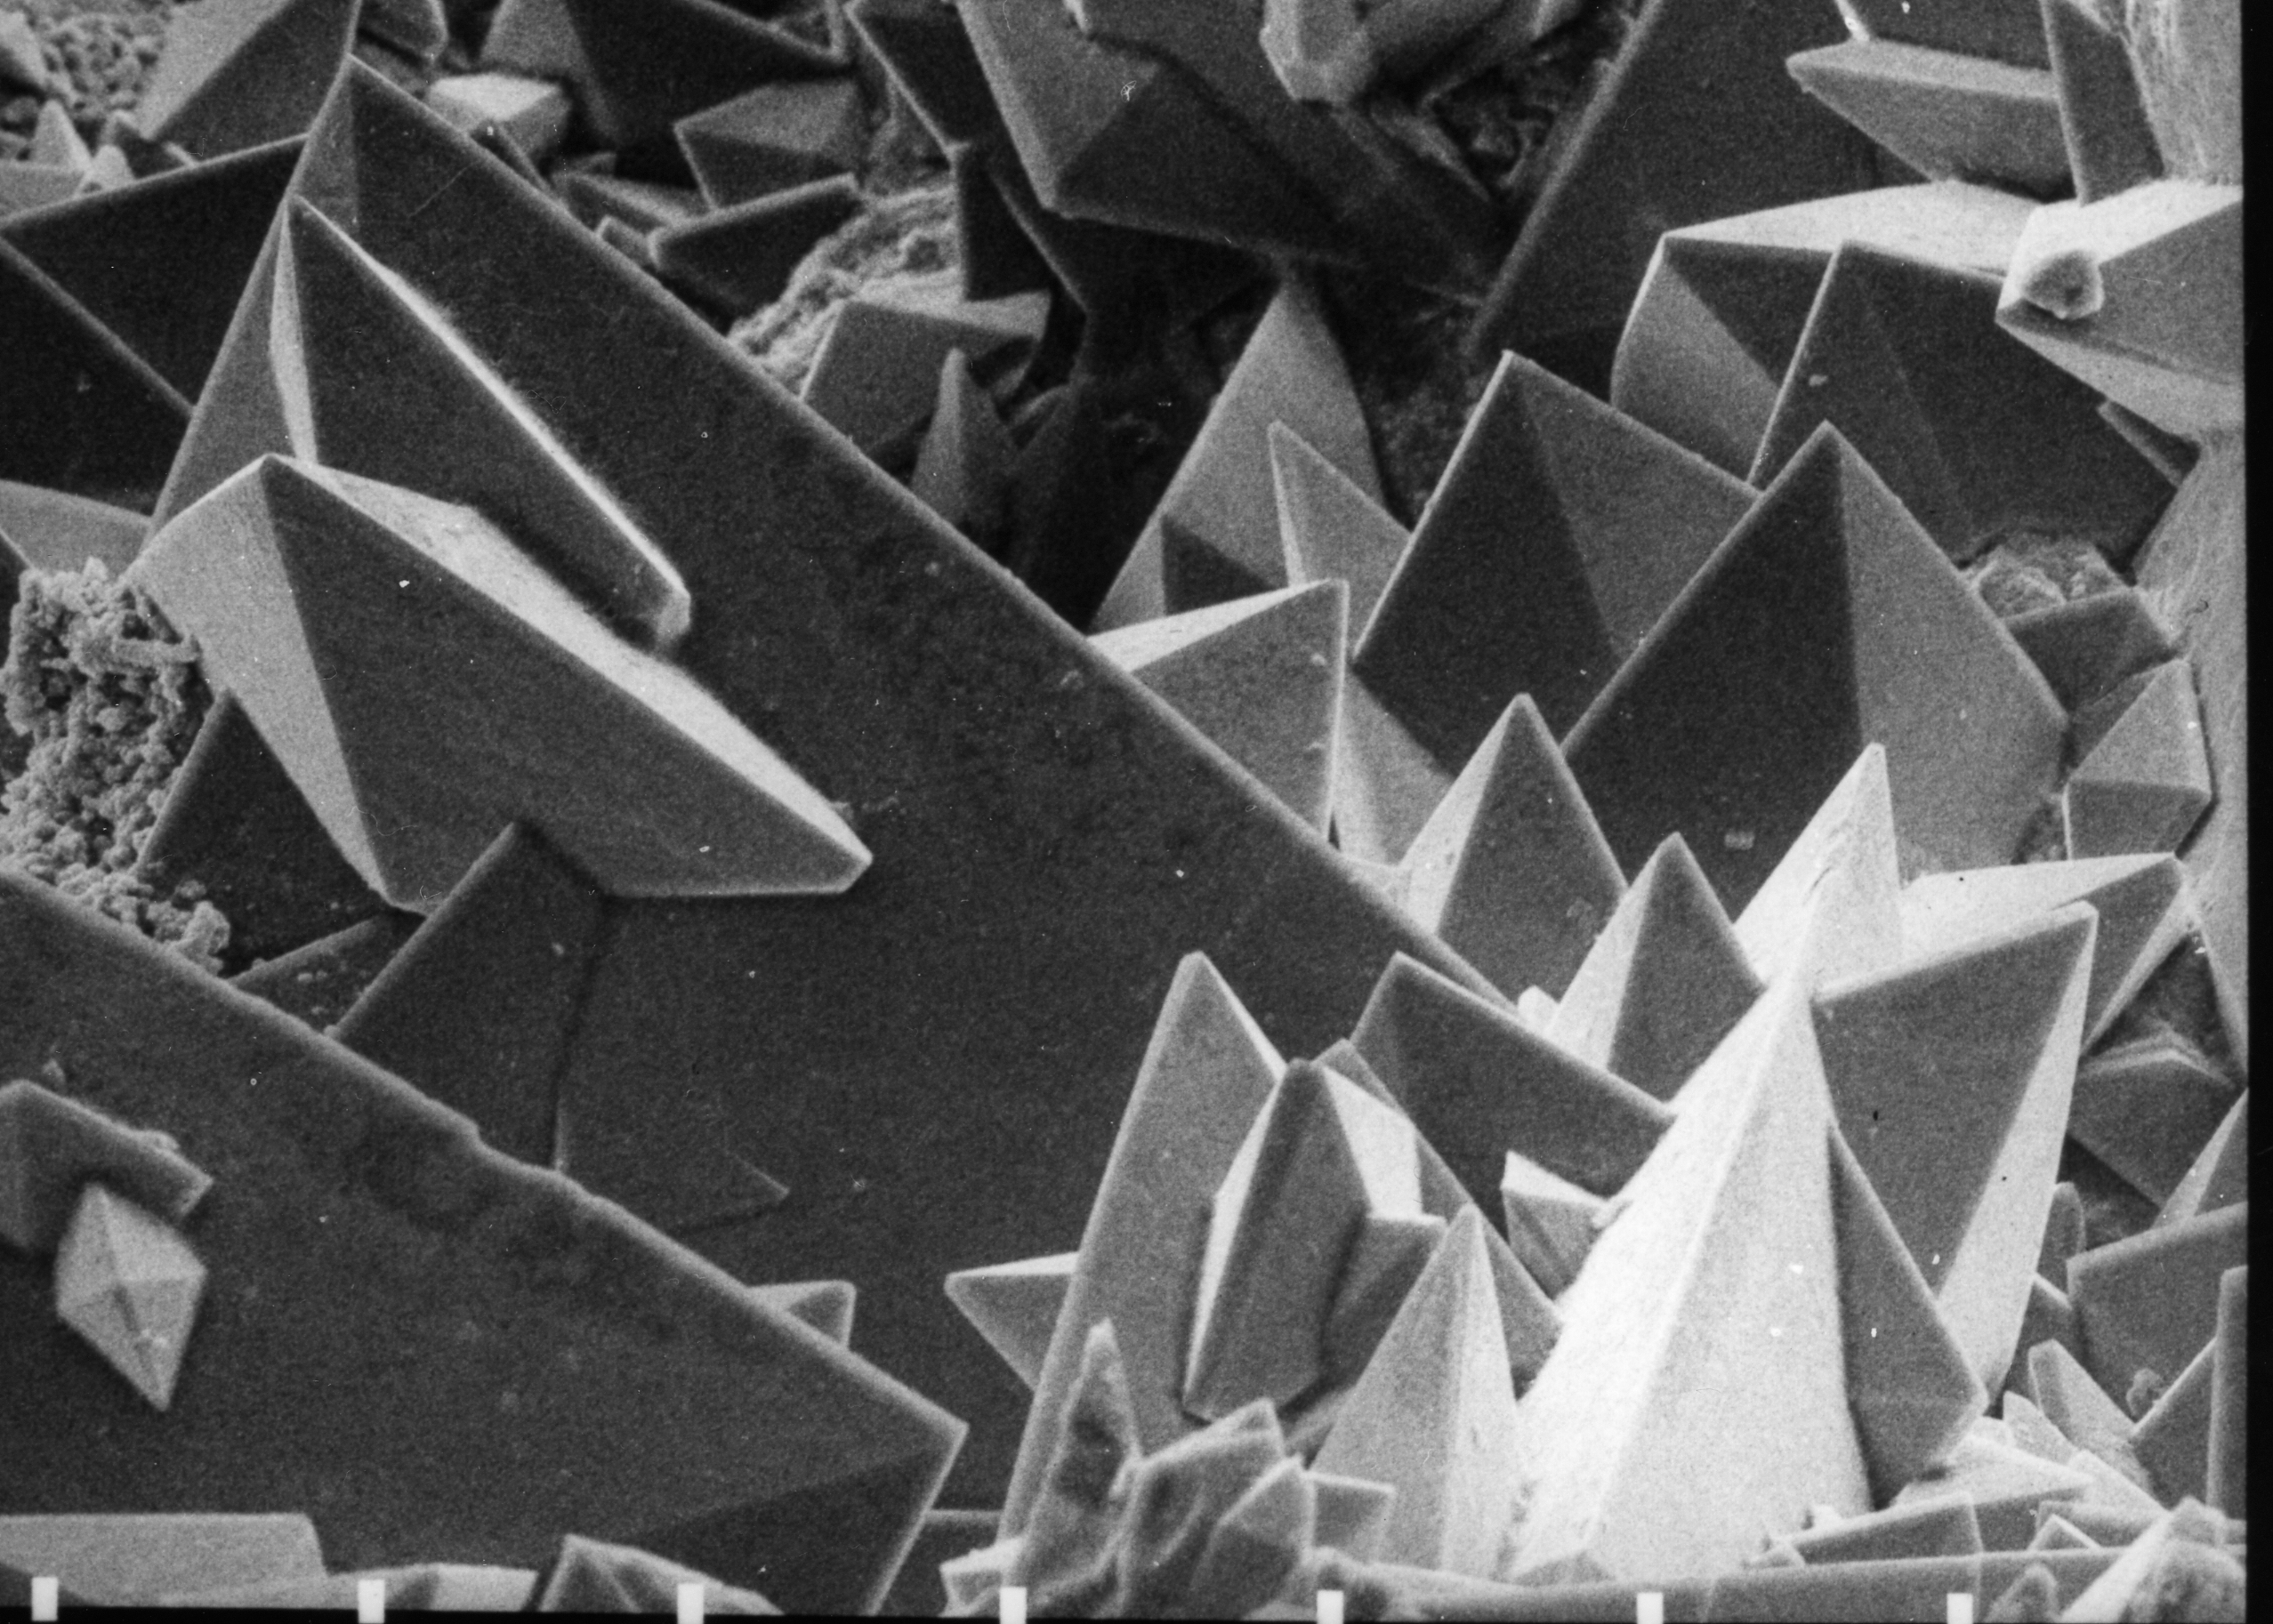 Calcium oxalate dihydrate crystals under Scanning Electron Micrograph (SEM) taken at 30 KV. Source: Wikimedia commons[7]